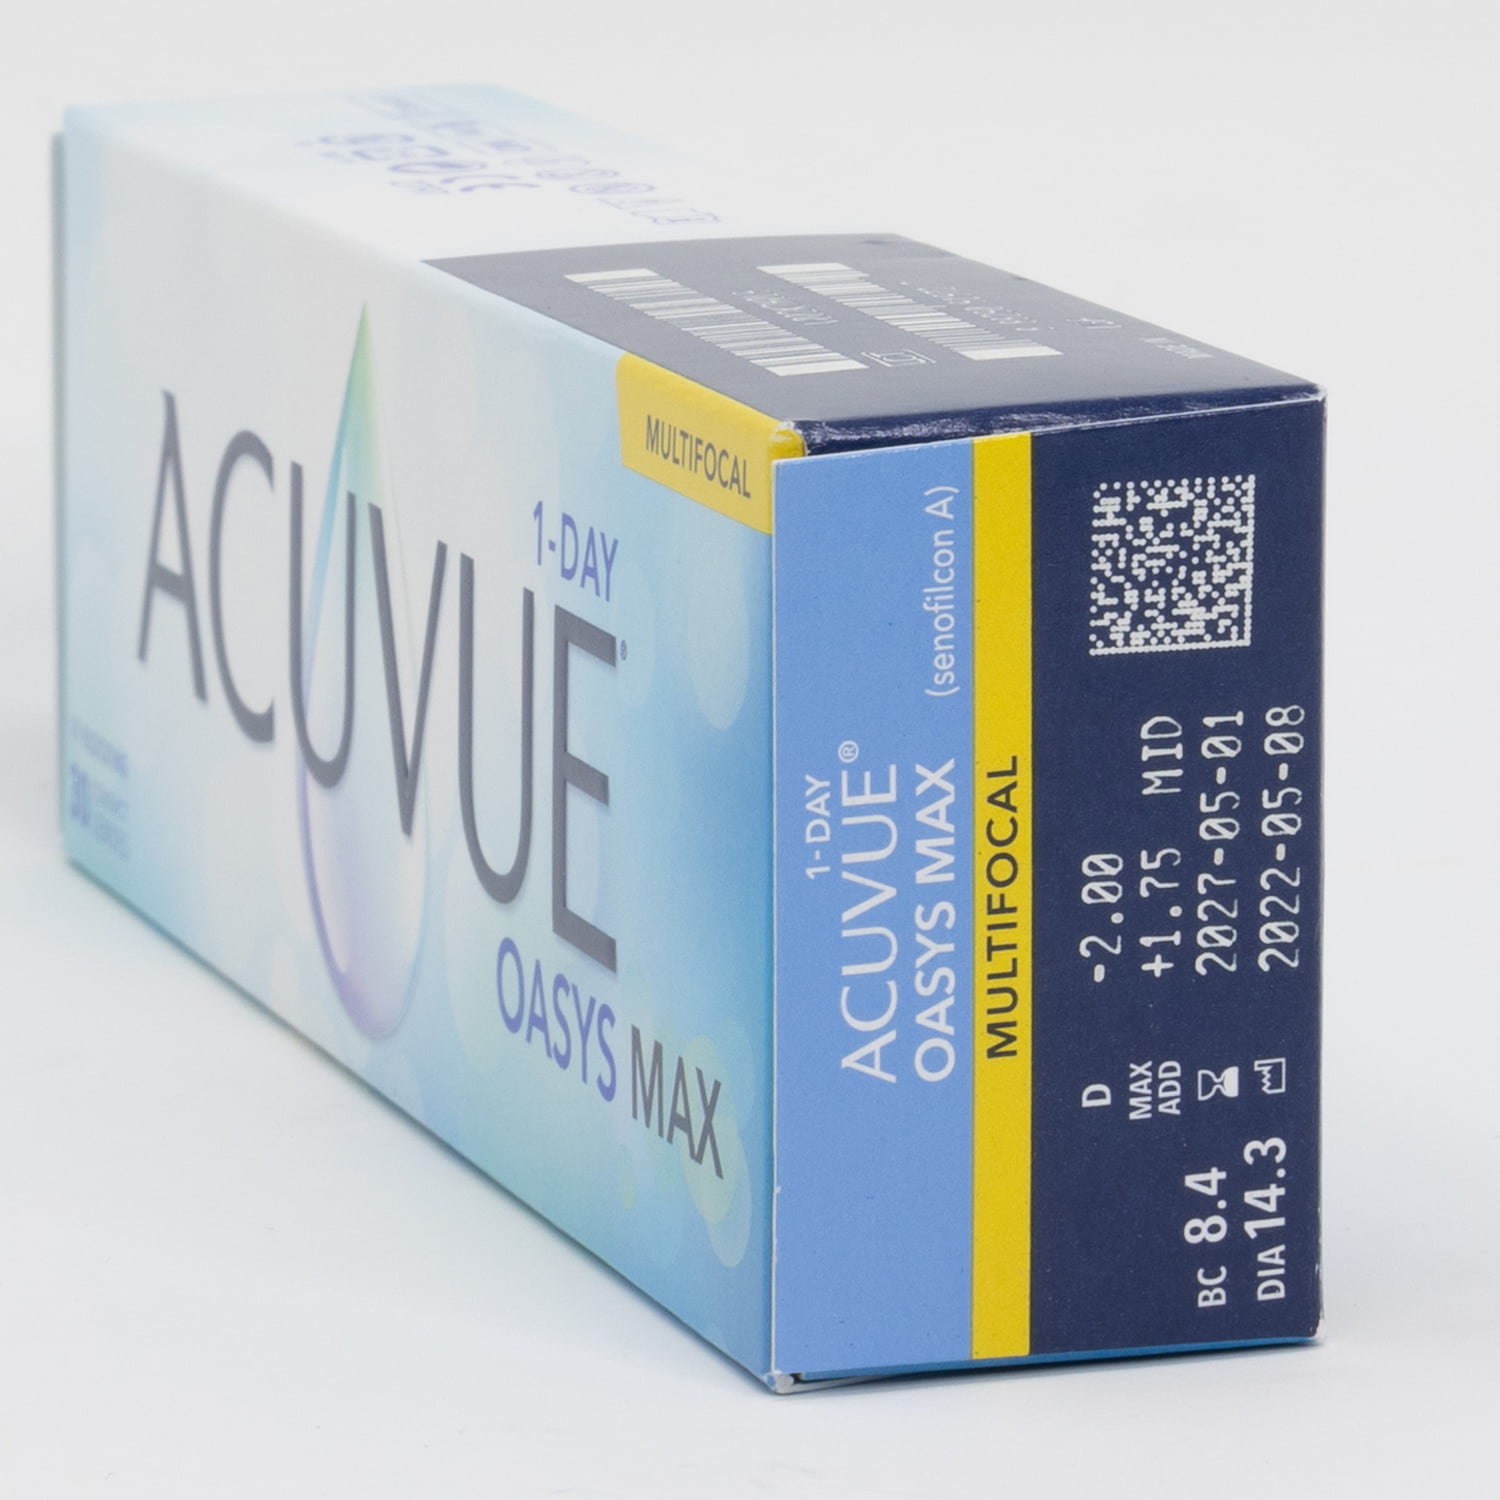 acuvue-oasys-max-1-day-multifocal-30-pack